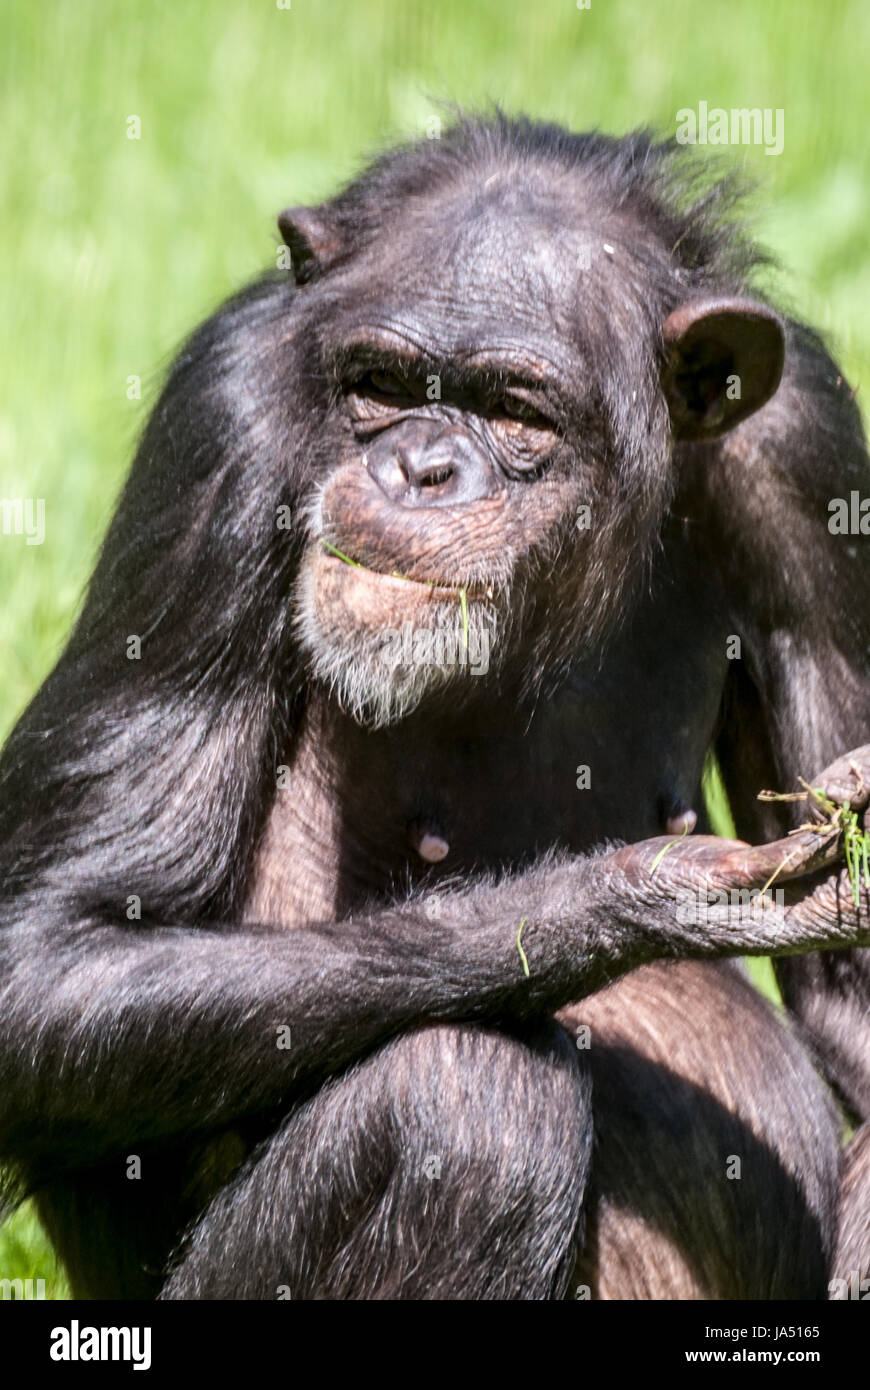 Pan troglodytes verus (Western chimpanzee) with grass on the mouth and on the hand Stock Photo